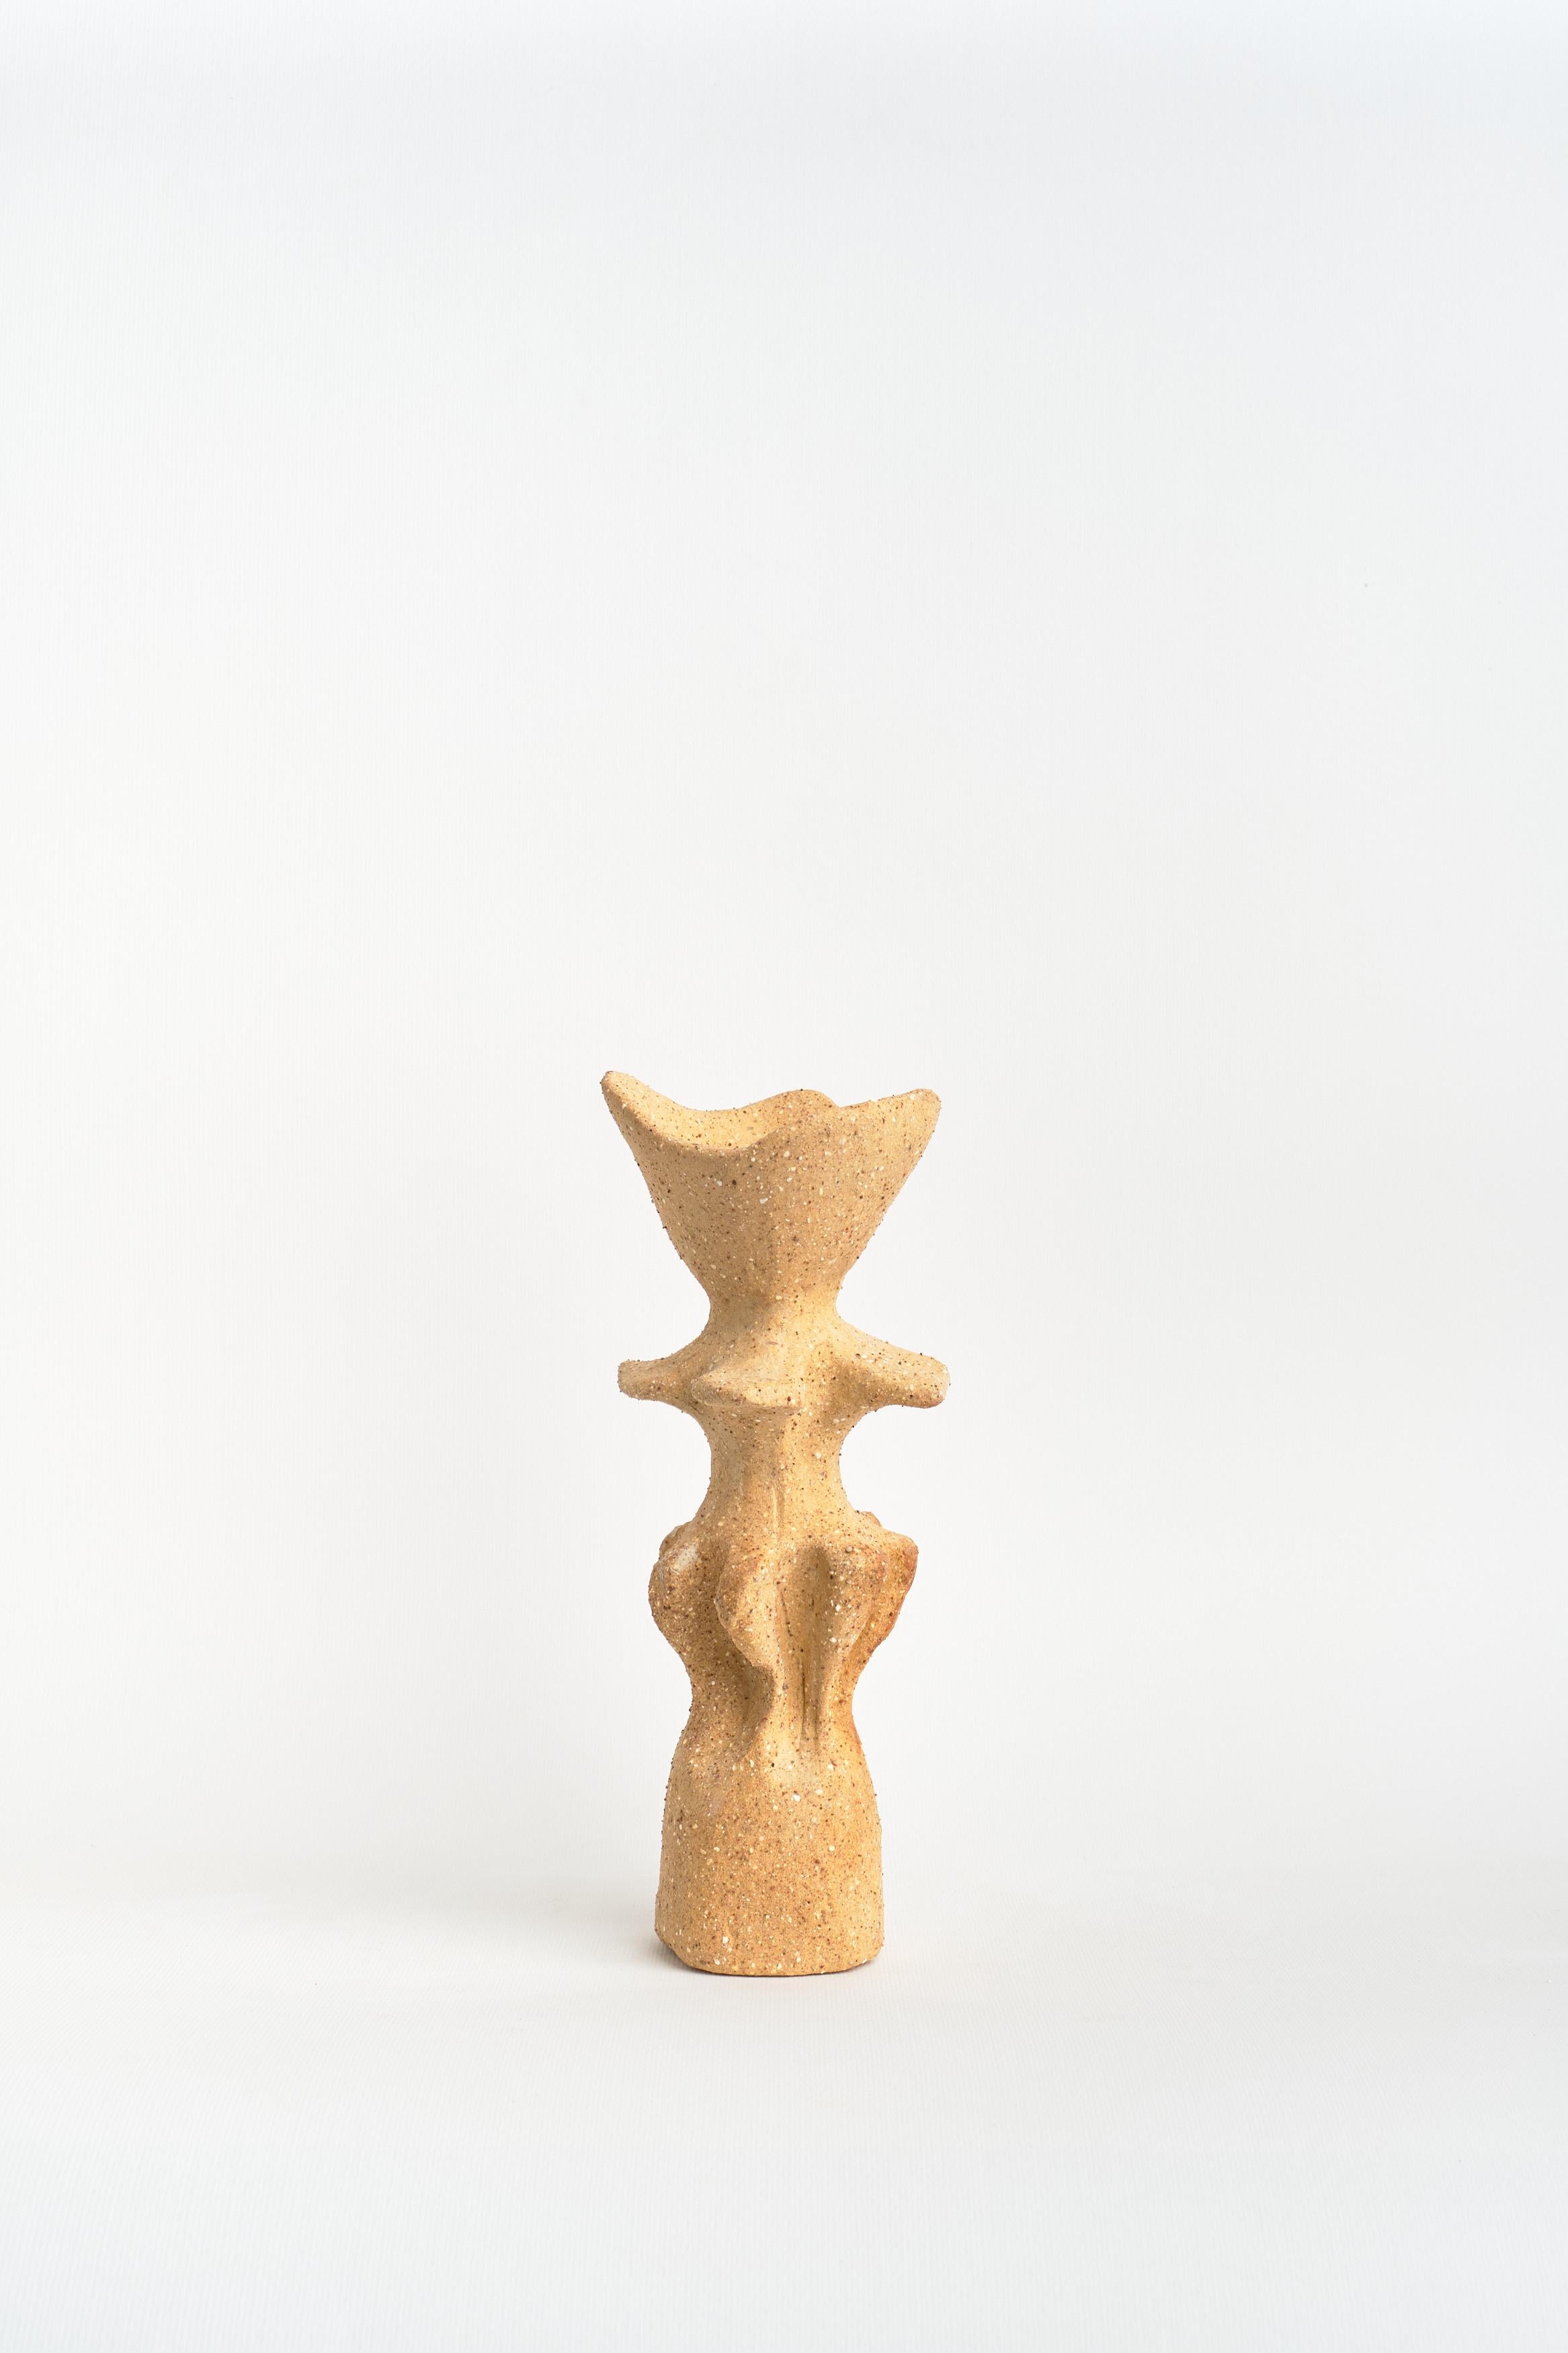 Candelabro 3 Candleholder by Camila Apaez
Unique
Materials: Stoneware, Red Clay
Dimensions: ⌀ 7 x H 20 cm

Ila Ceramica emerged from a process of inner inquiry where ceramics became a space for presence, silence, touch and patience. Camila